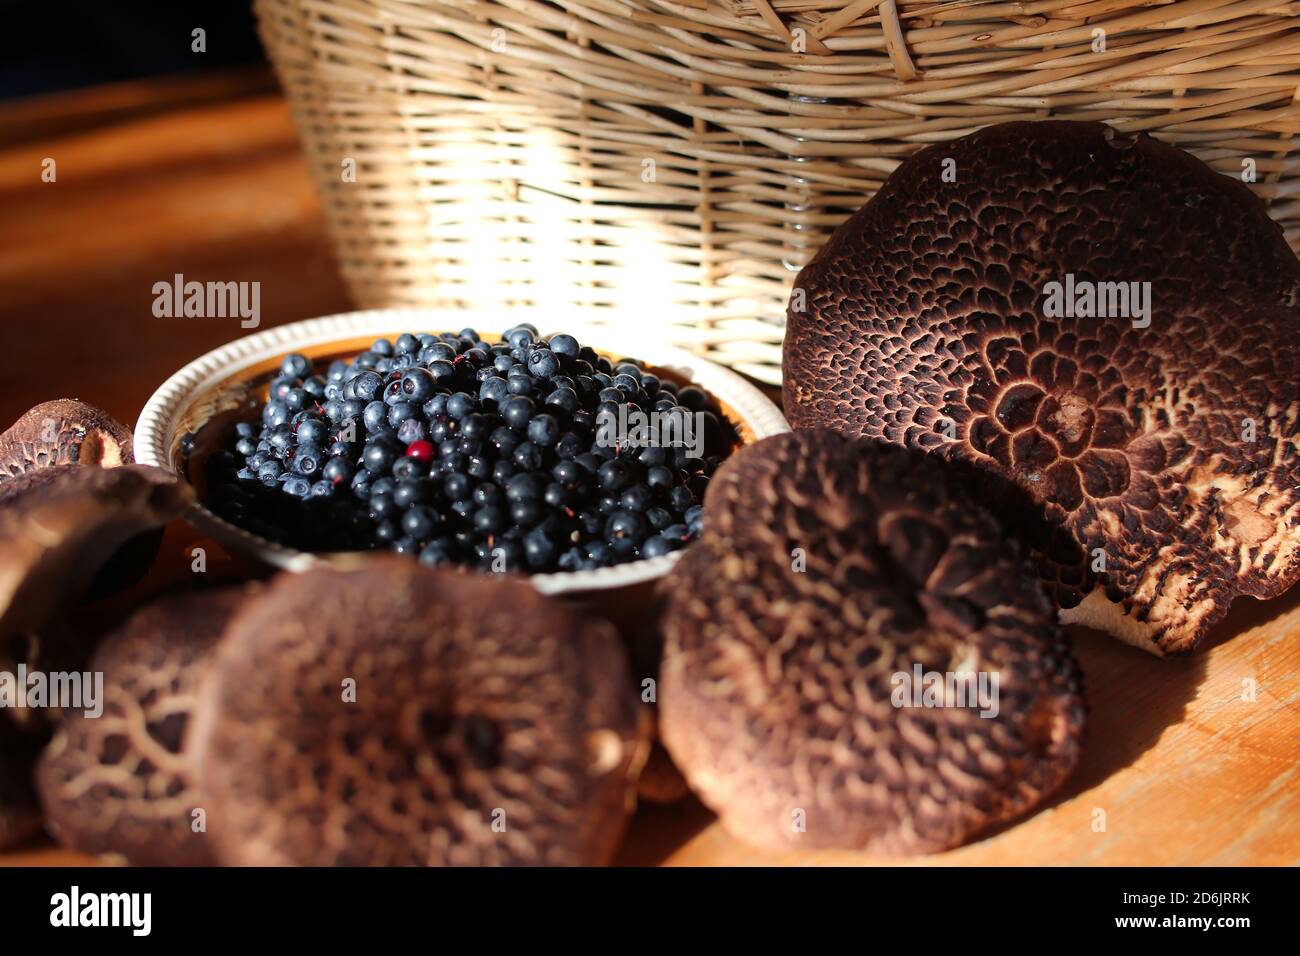 A mushroom forays yield, with Scaly hedgehog and blueberries. Stock Photo